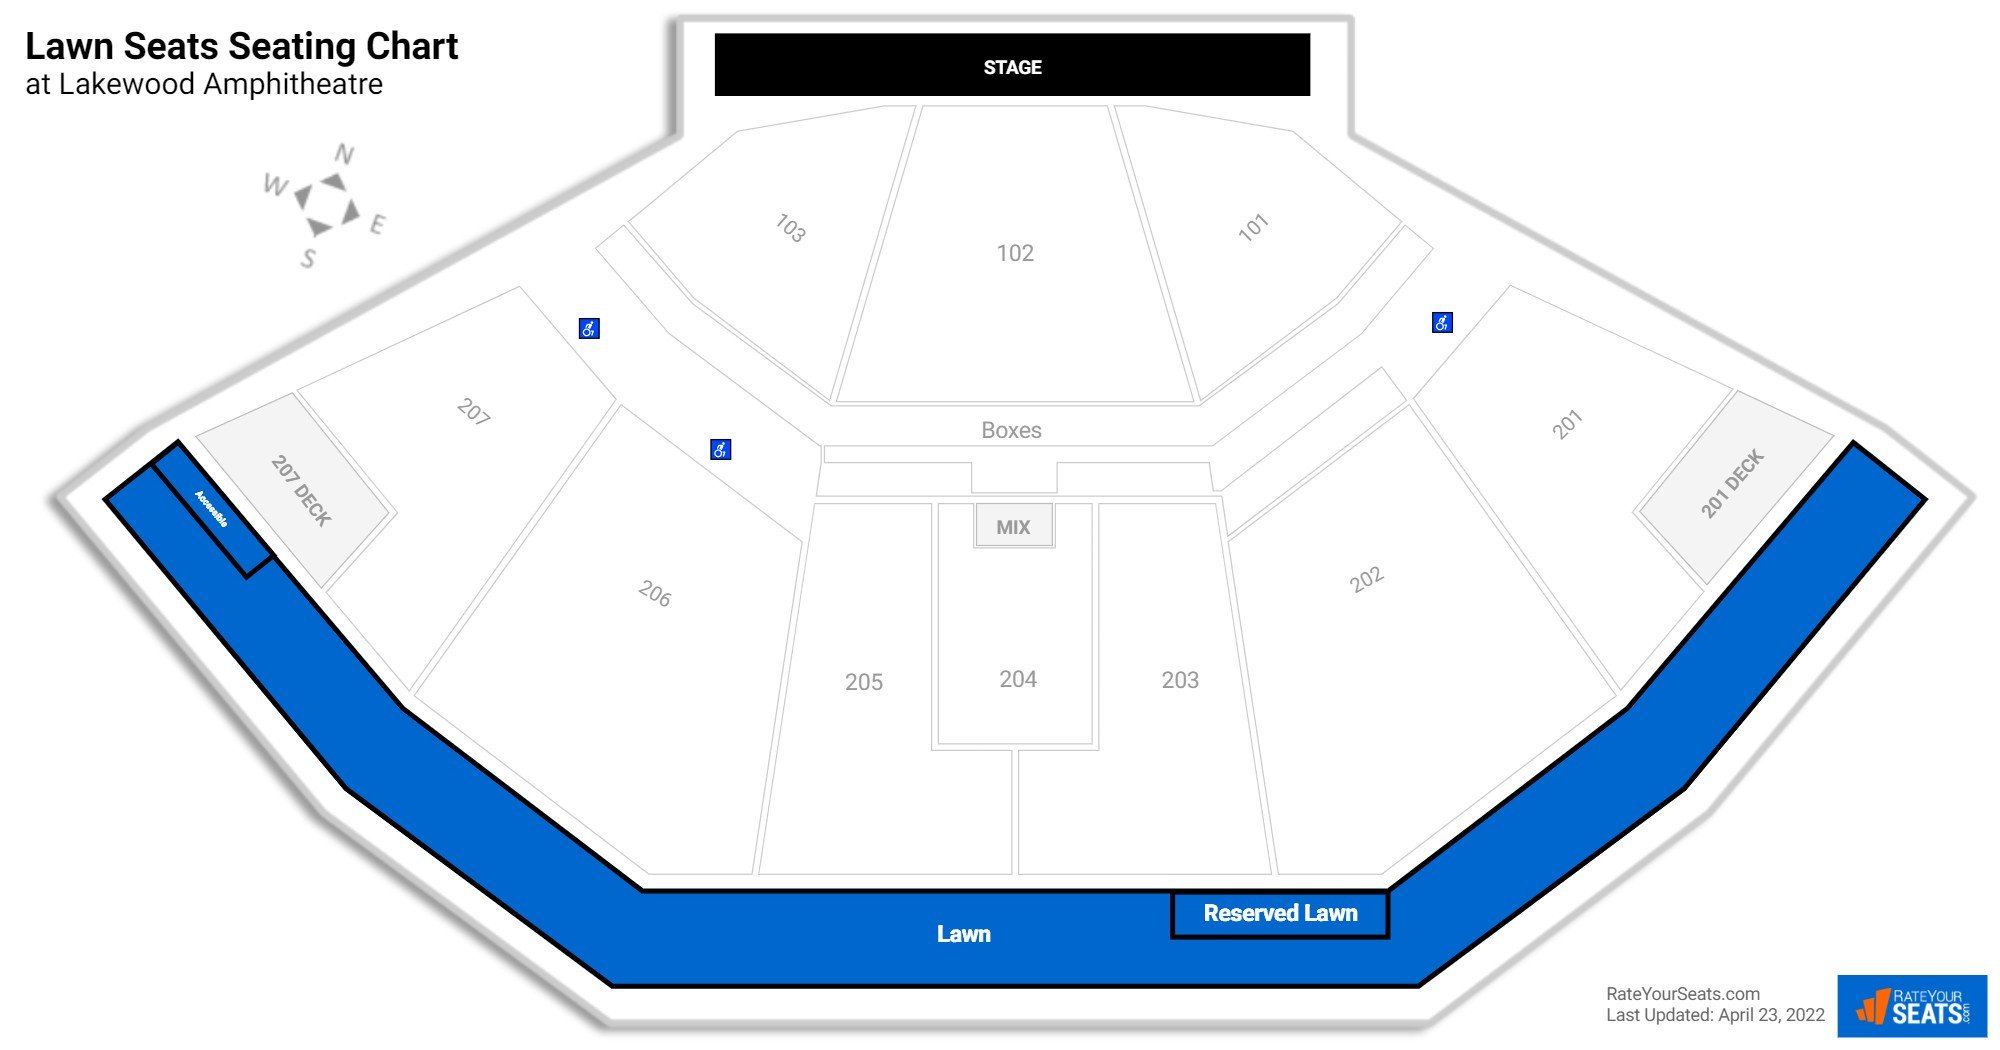 Concert Lawn Seats Seating Chart at Lakewood Amphitheatre